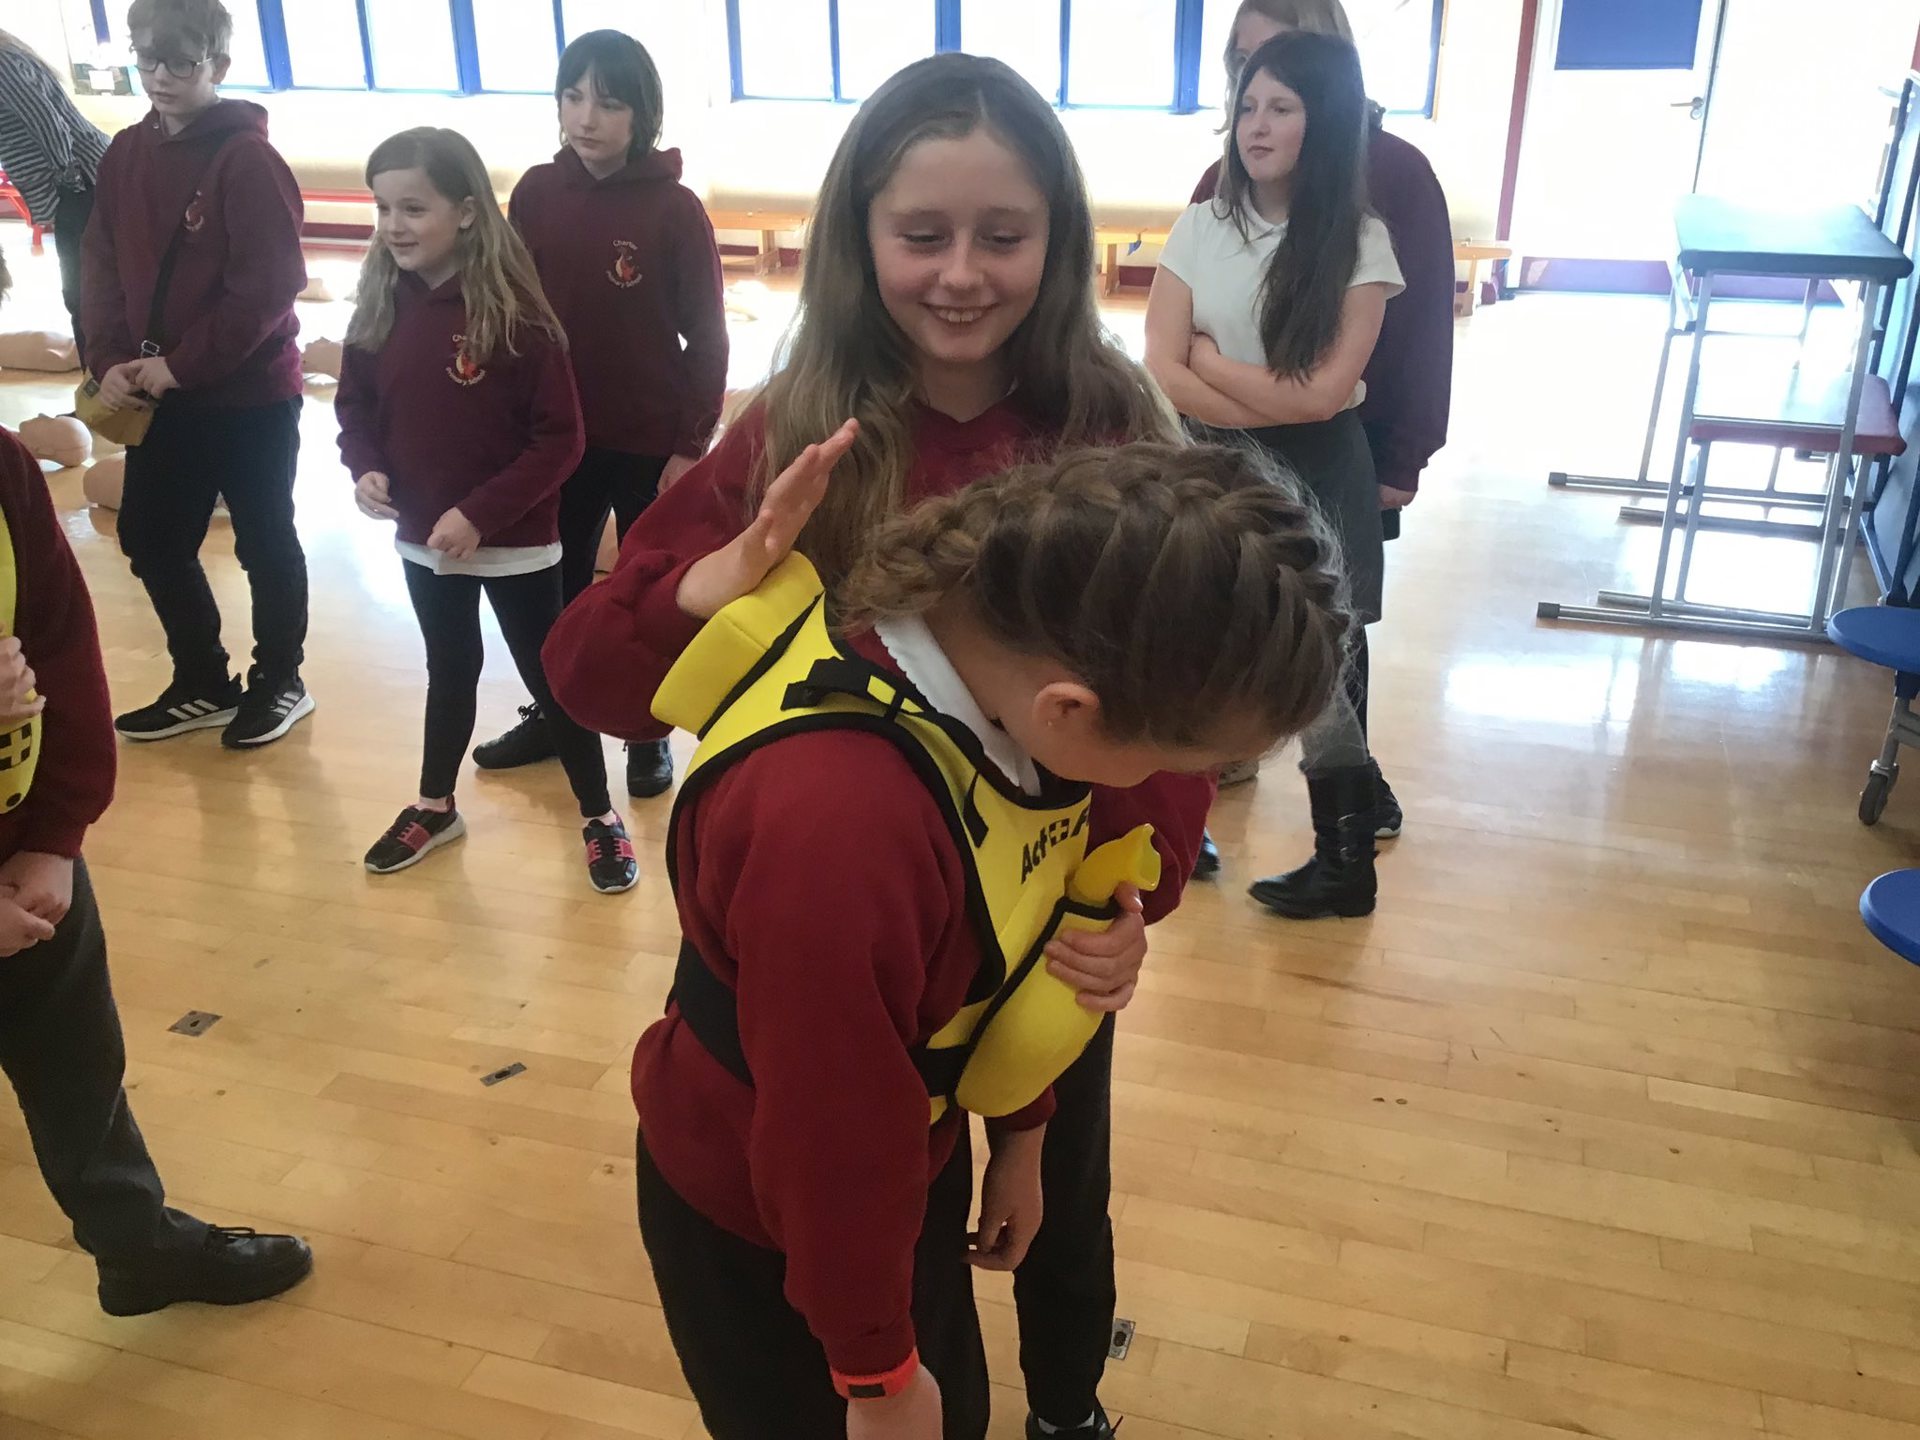 2 school children practicing how to help someone who is choking